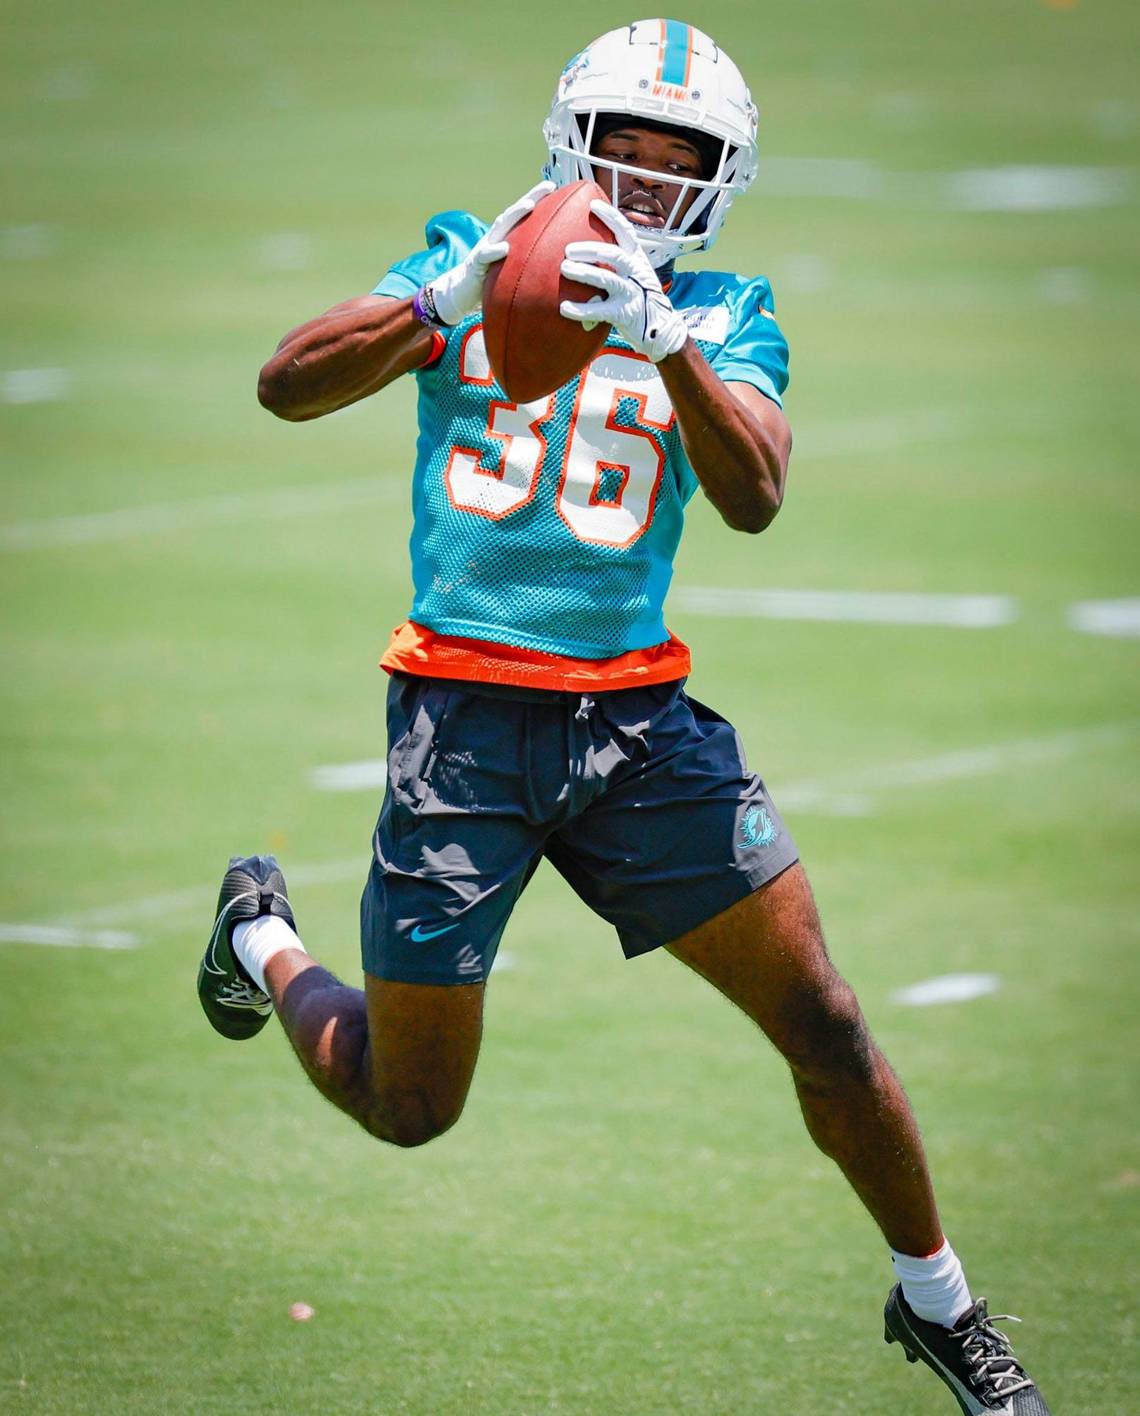 Kelly: Undrafted rookies historically will get their chance with Dolphins | Opinion